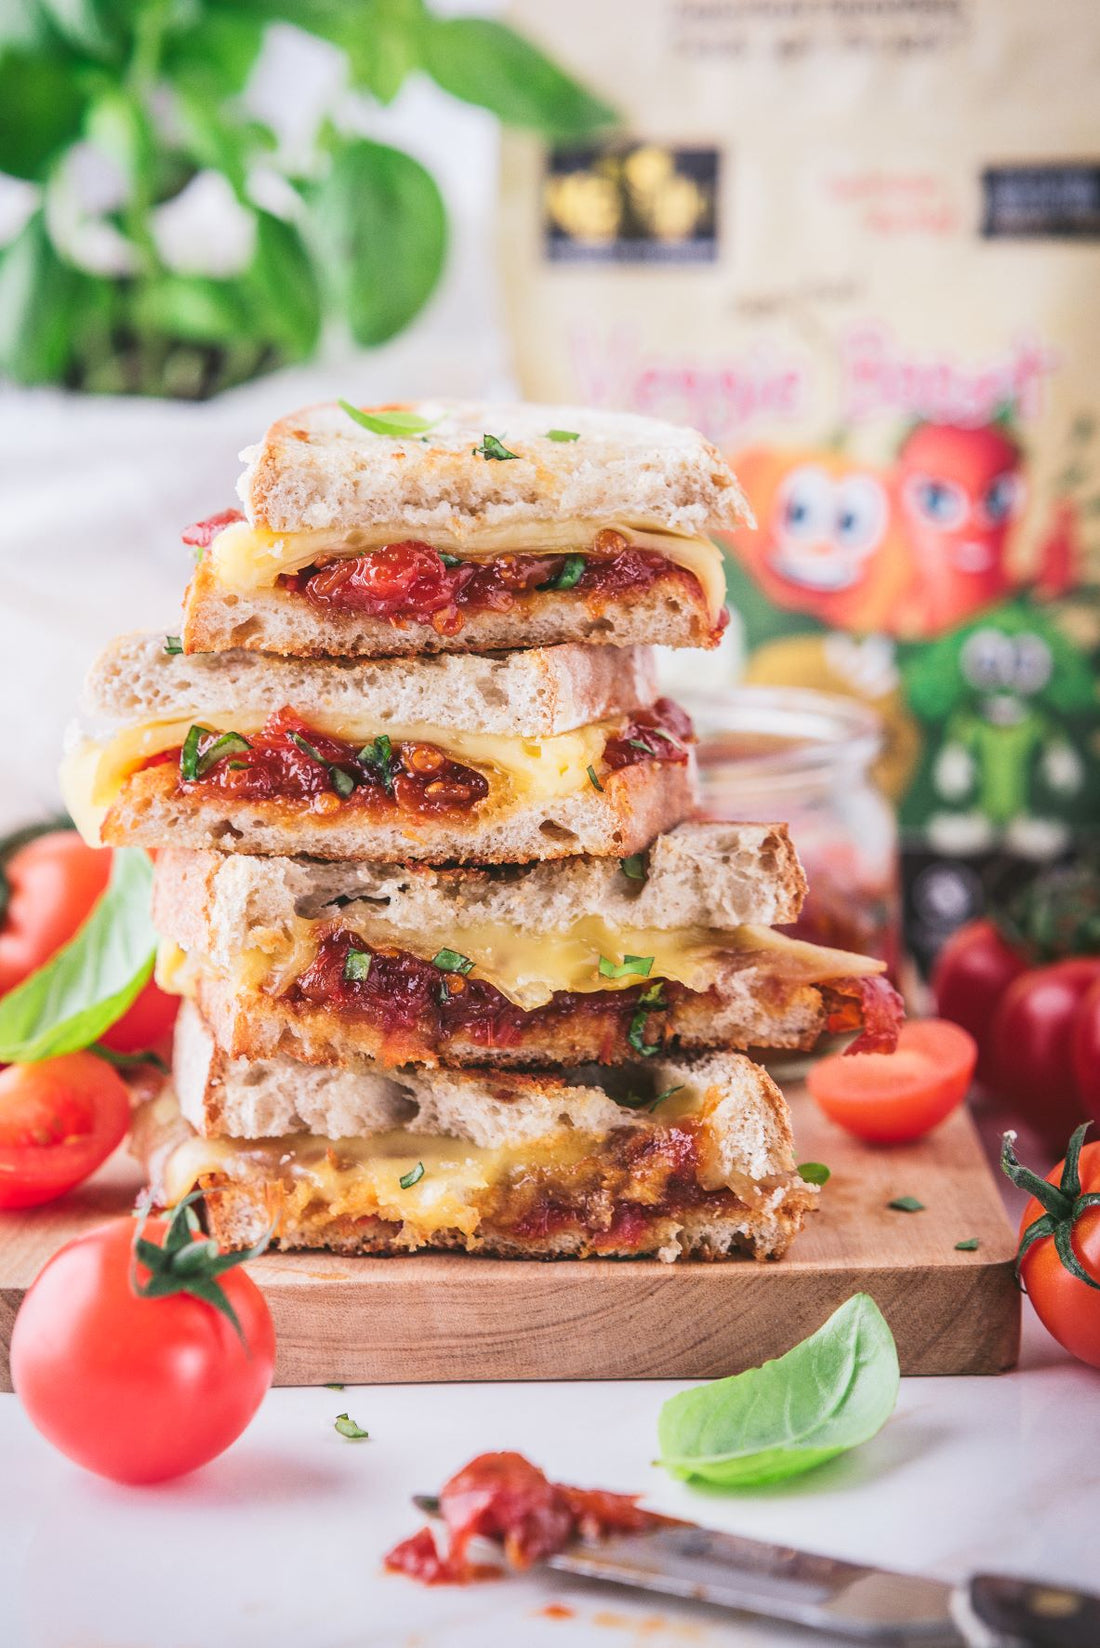 Tomato Jam Grilled Cheese Sandwich